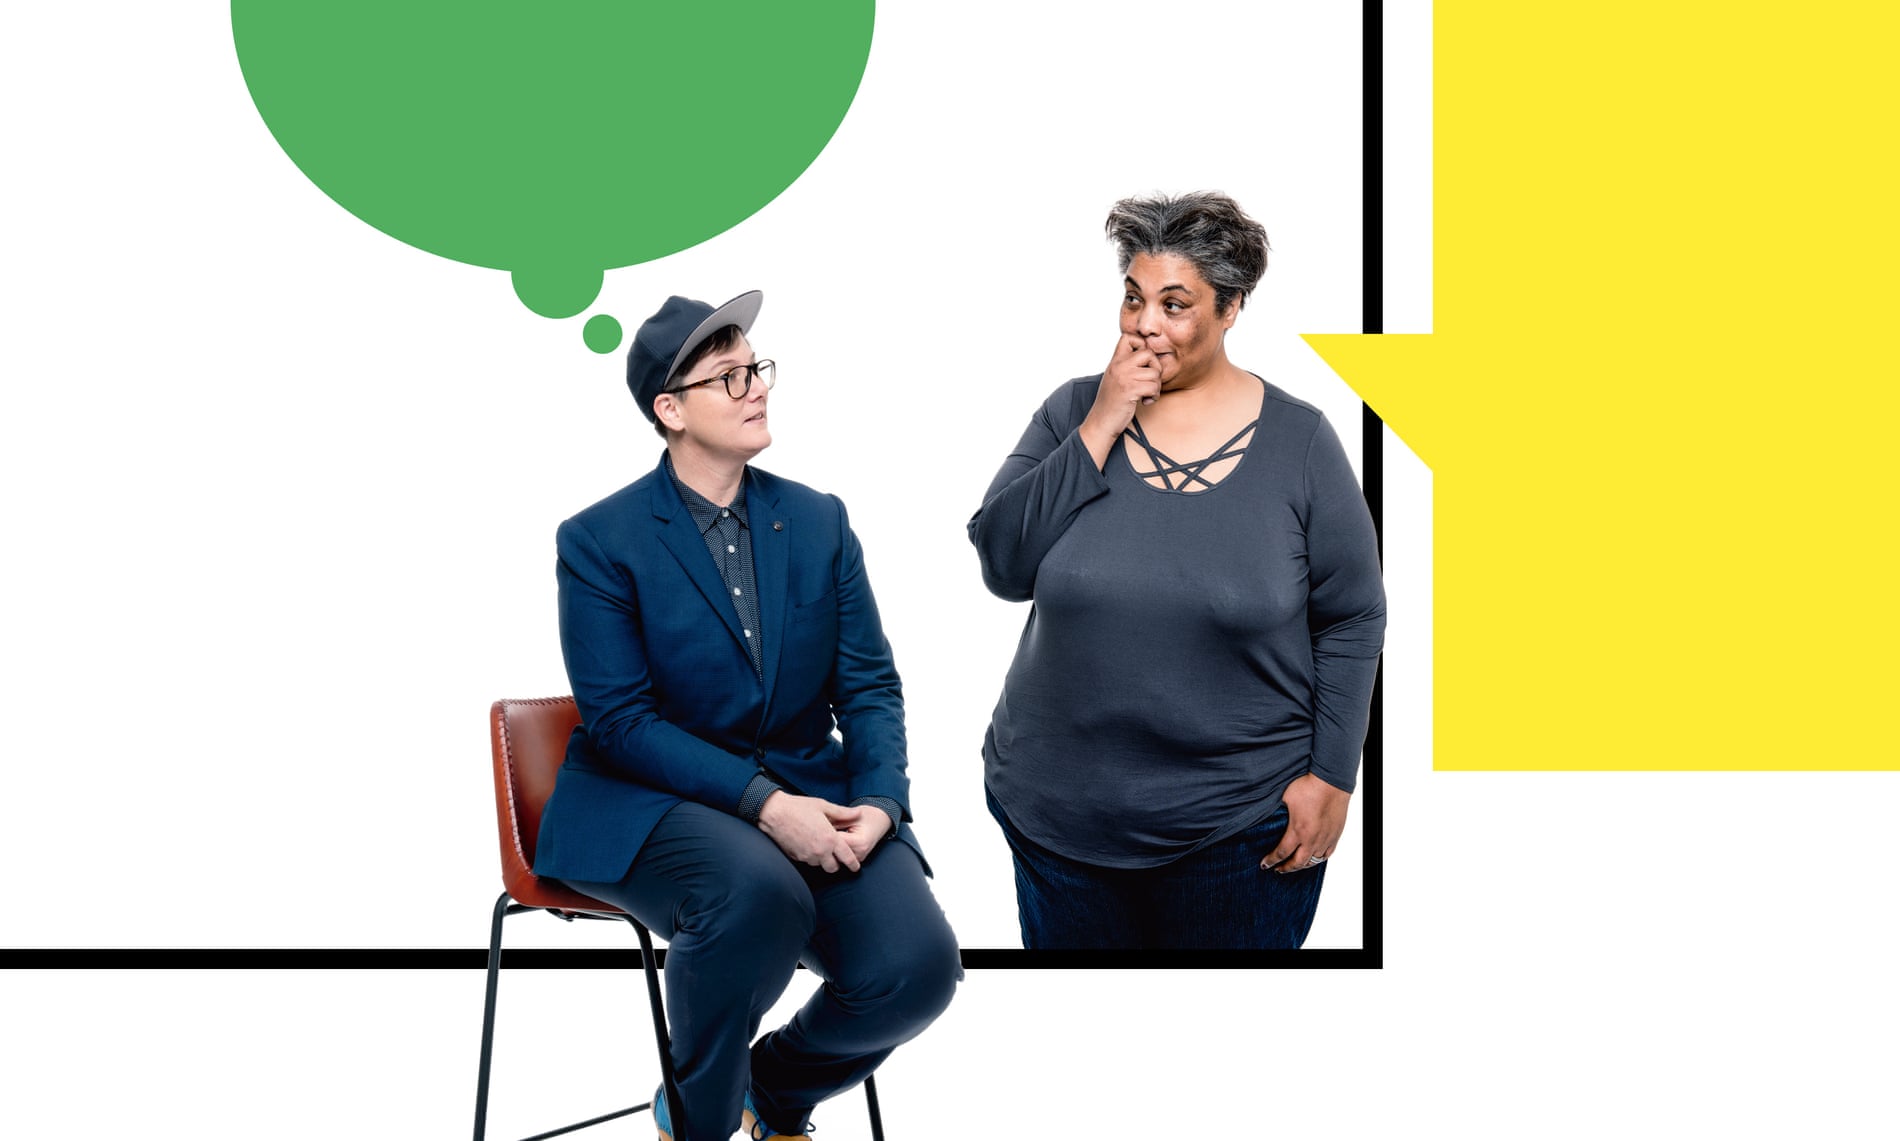 Hannah Gadsby (on left) and Roxane Gay